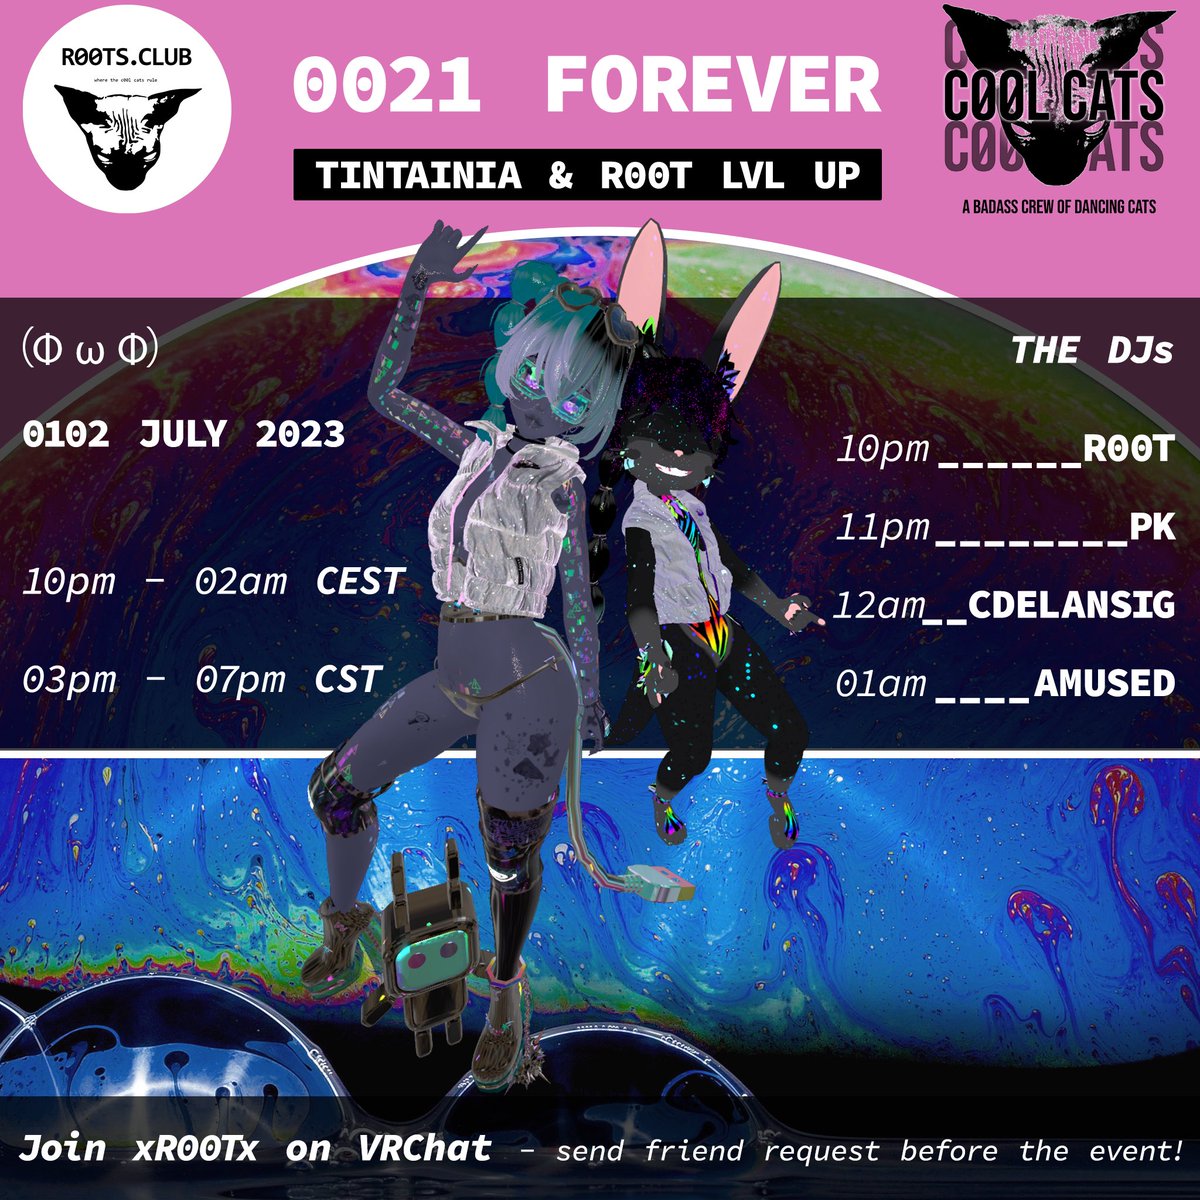 Come celebrate a double #c00lcat bday with us this Saturday, July 1st from 10 pm CEST. 4 hours 4 DJs and lots of dancing with the c00l cats crew! Join xR00Tx on #vrc #21forever